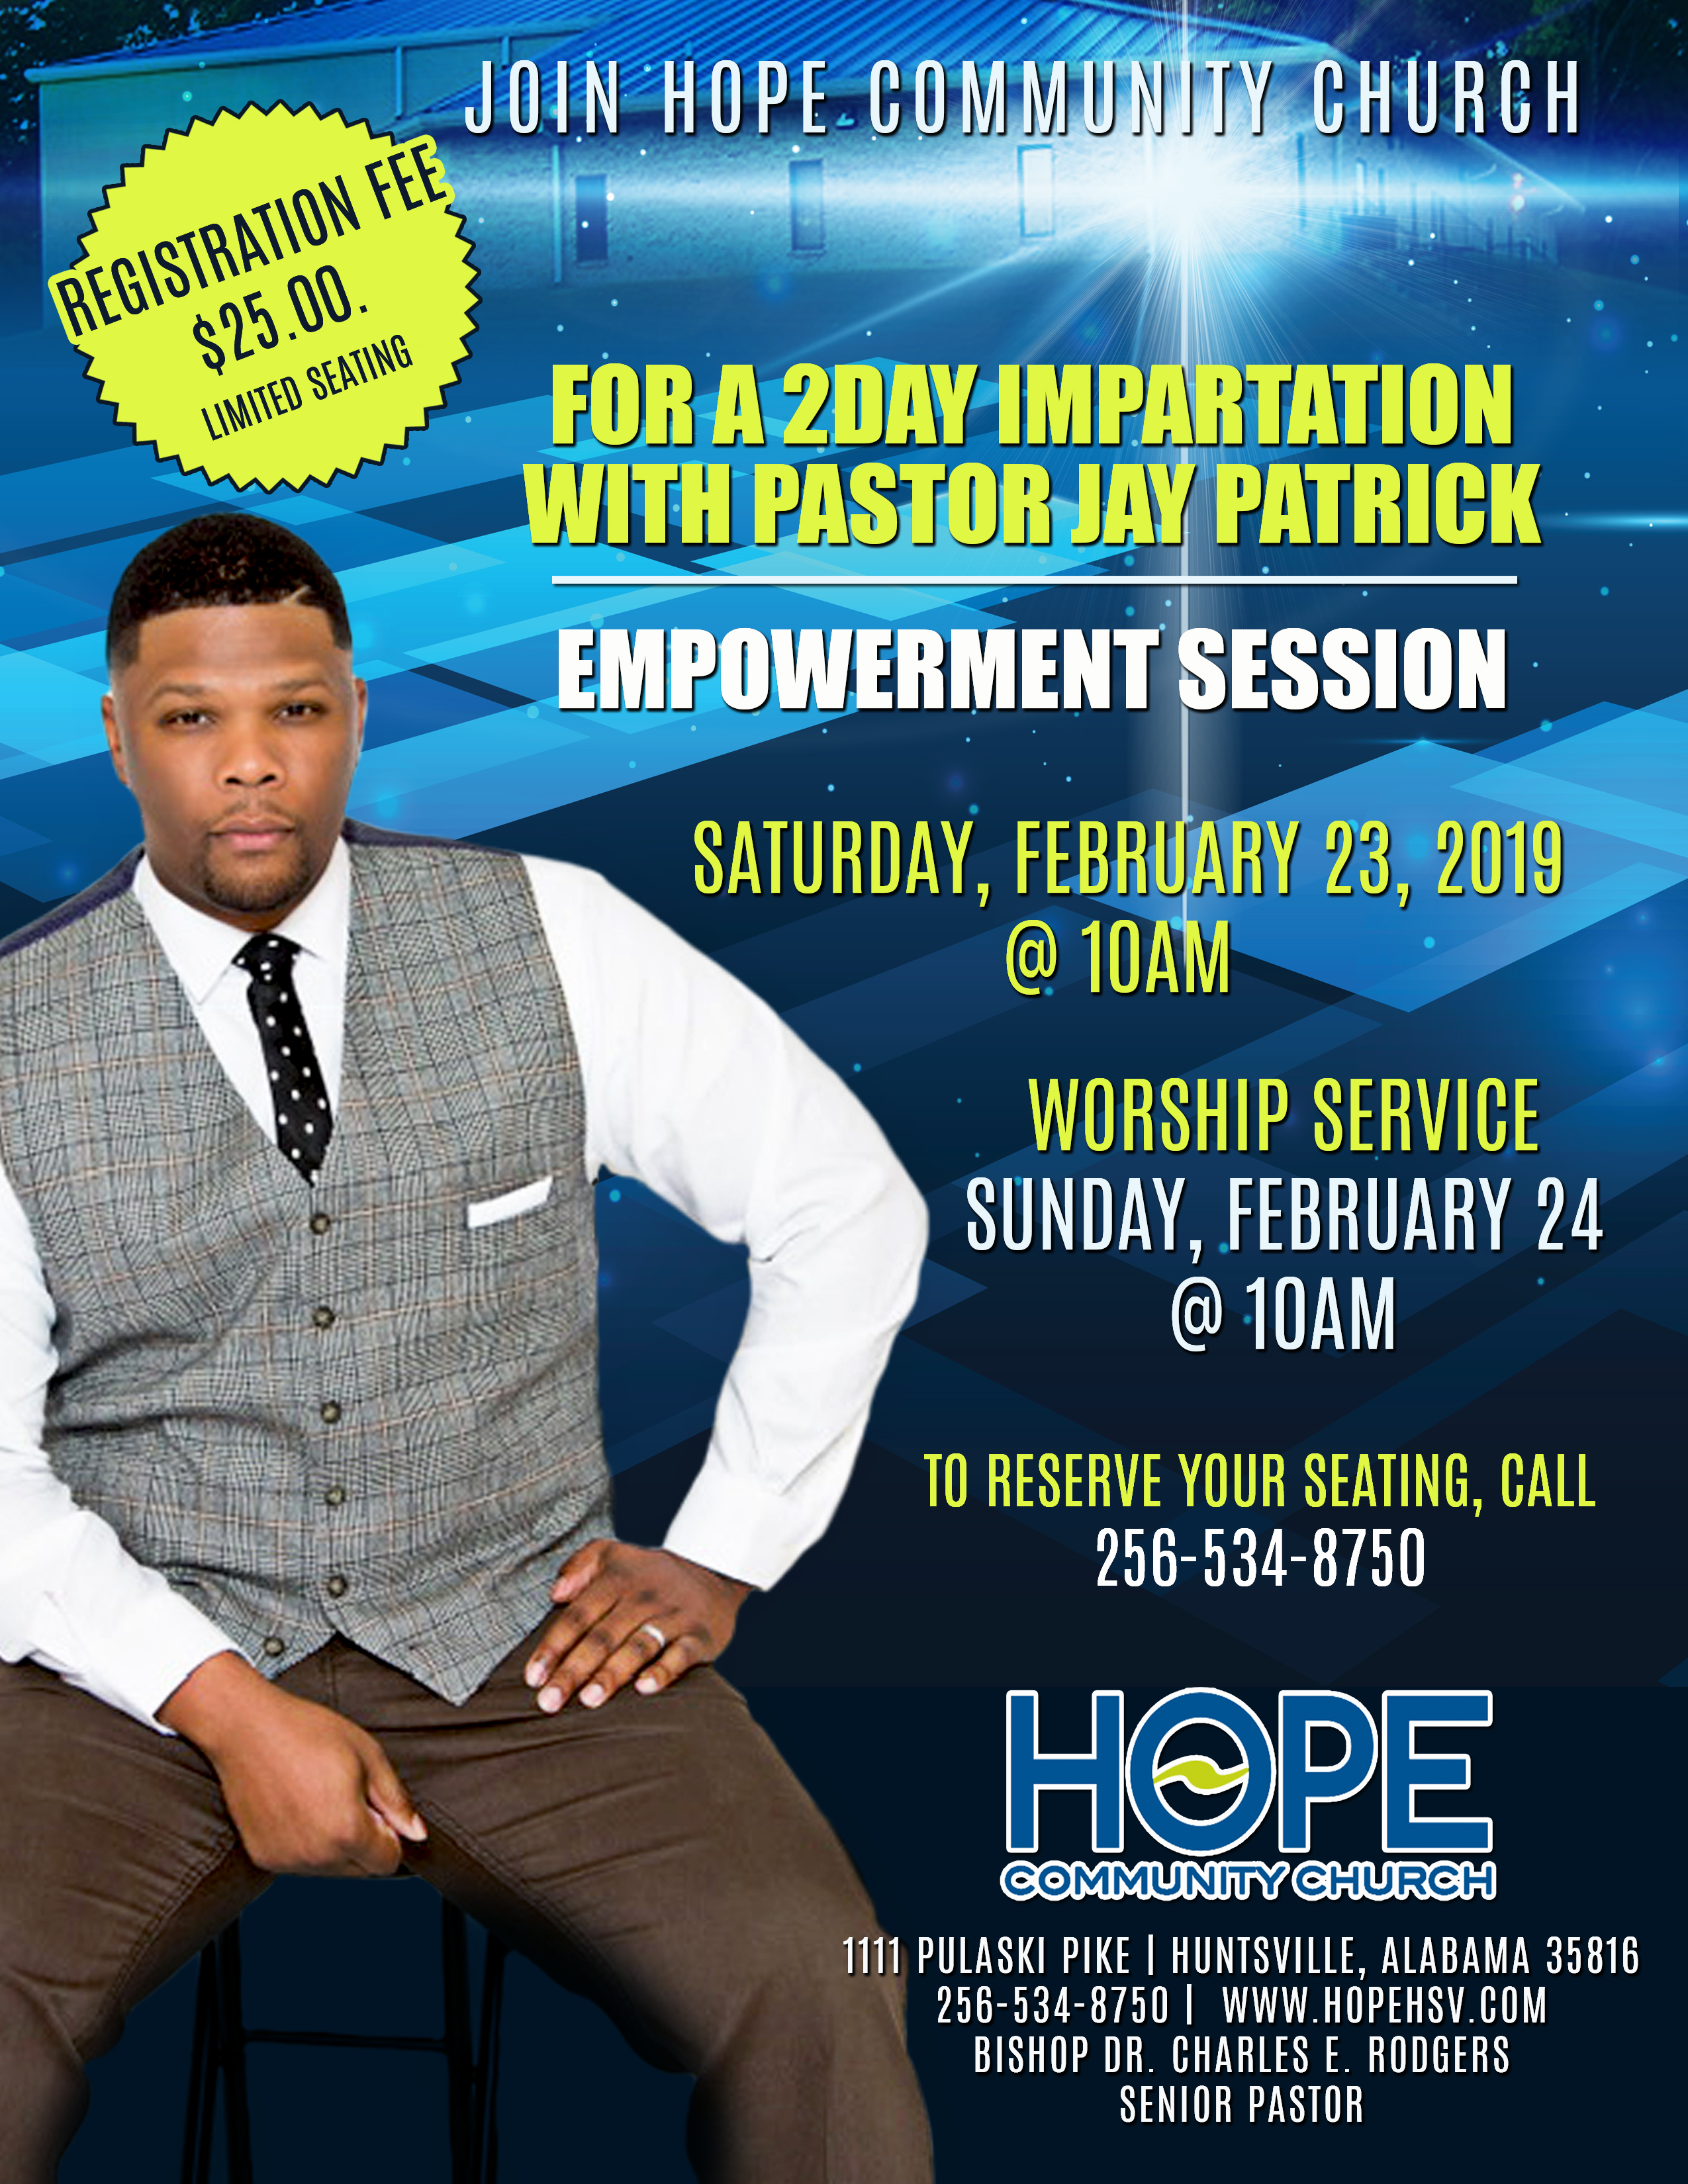 <a href="https://www.eventbrite.com/e/pastor-jay-patrick-empowerment-session-tickets-55938735263?aff=affiliate1" rel="noopener" target="_blank"></a>